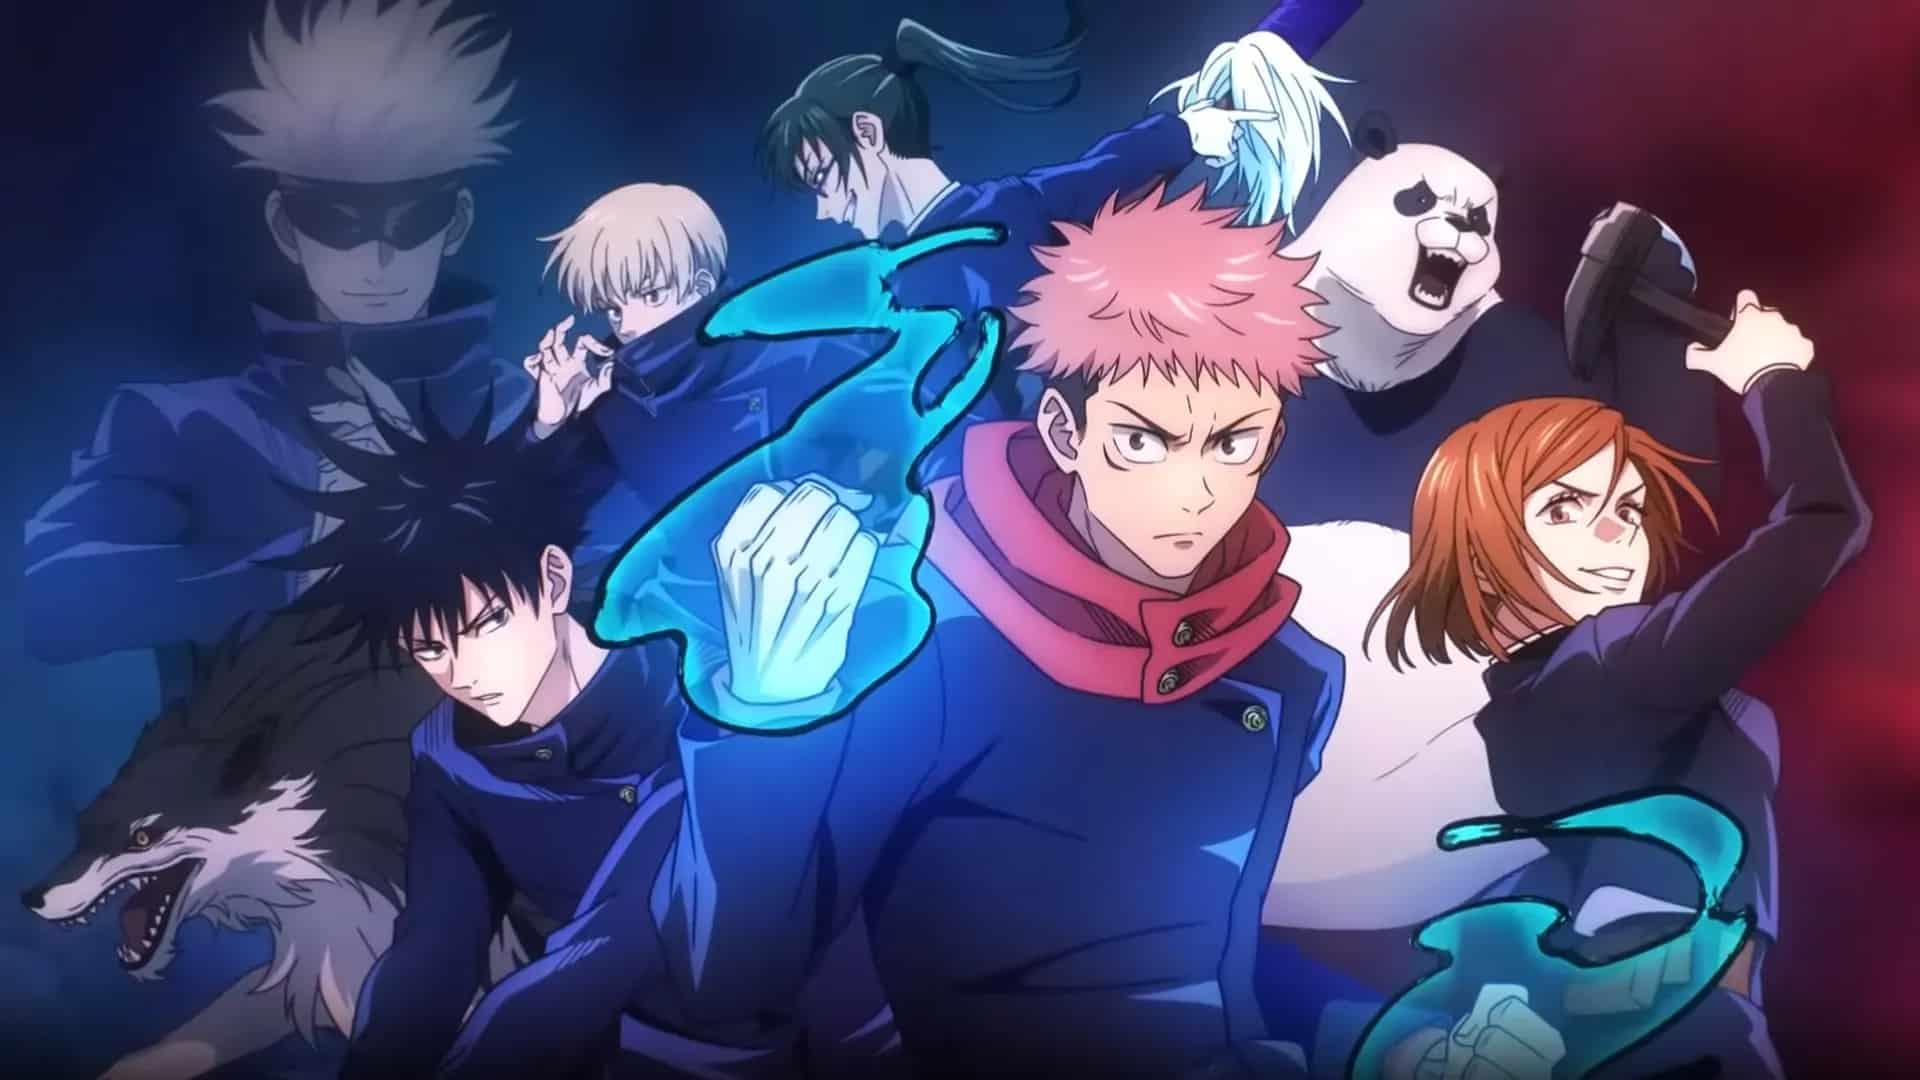 How to watch Jujutsu Kaisen in order (TV series and movie)